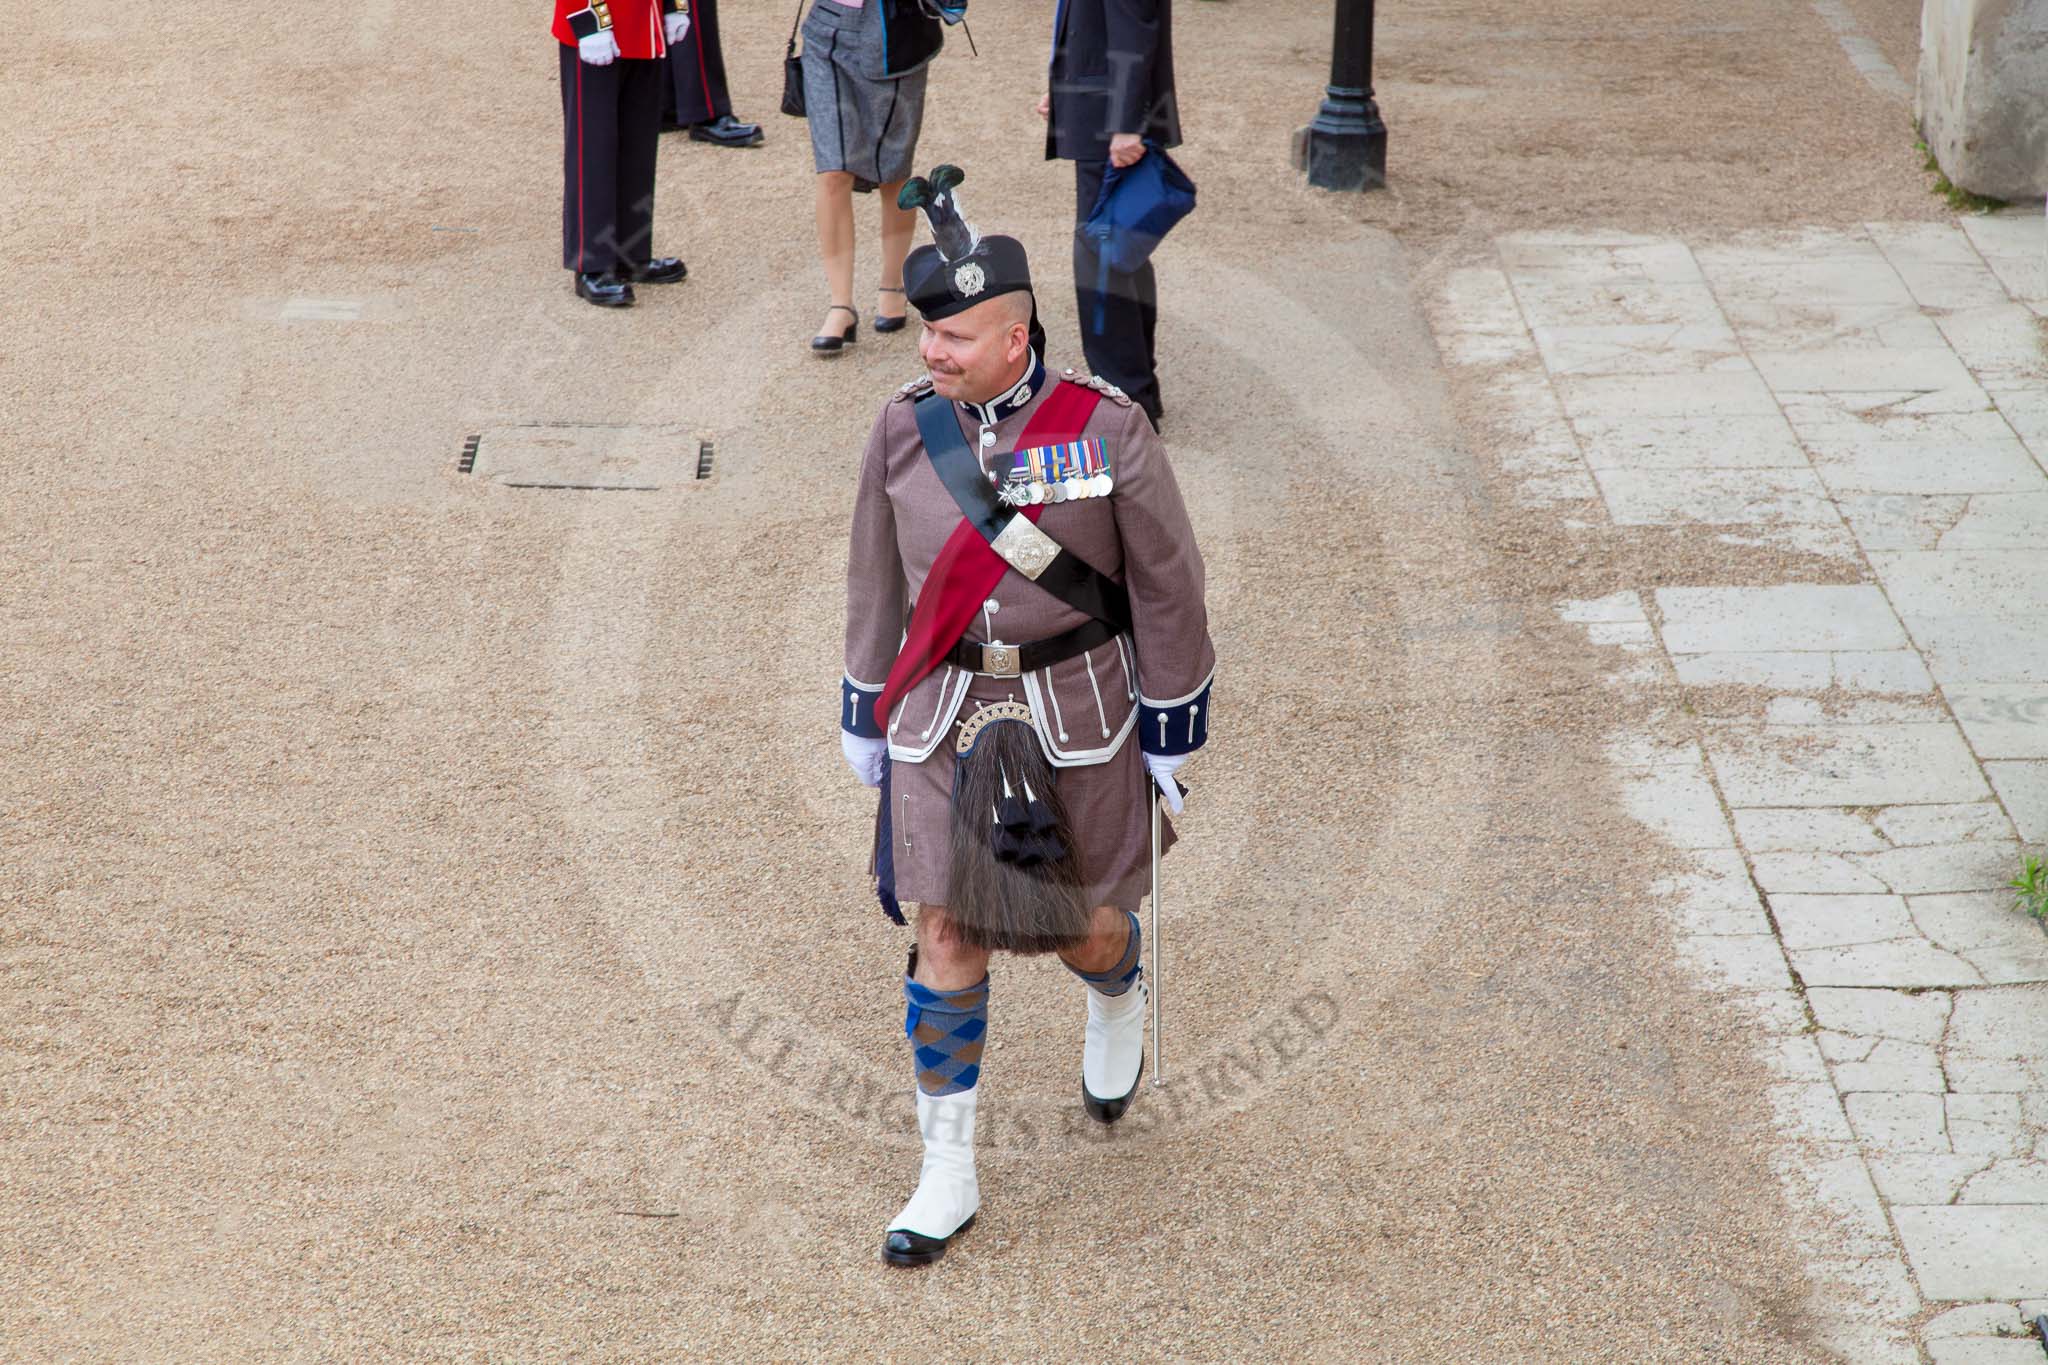 Trooping the Colour 2014.
Horse Guards Parade, Westminster,
London SW1A,

United Kingdom,
on 14 June 2014 at 09:31, image #21